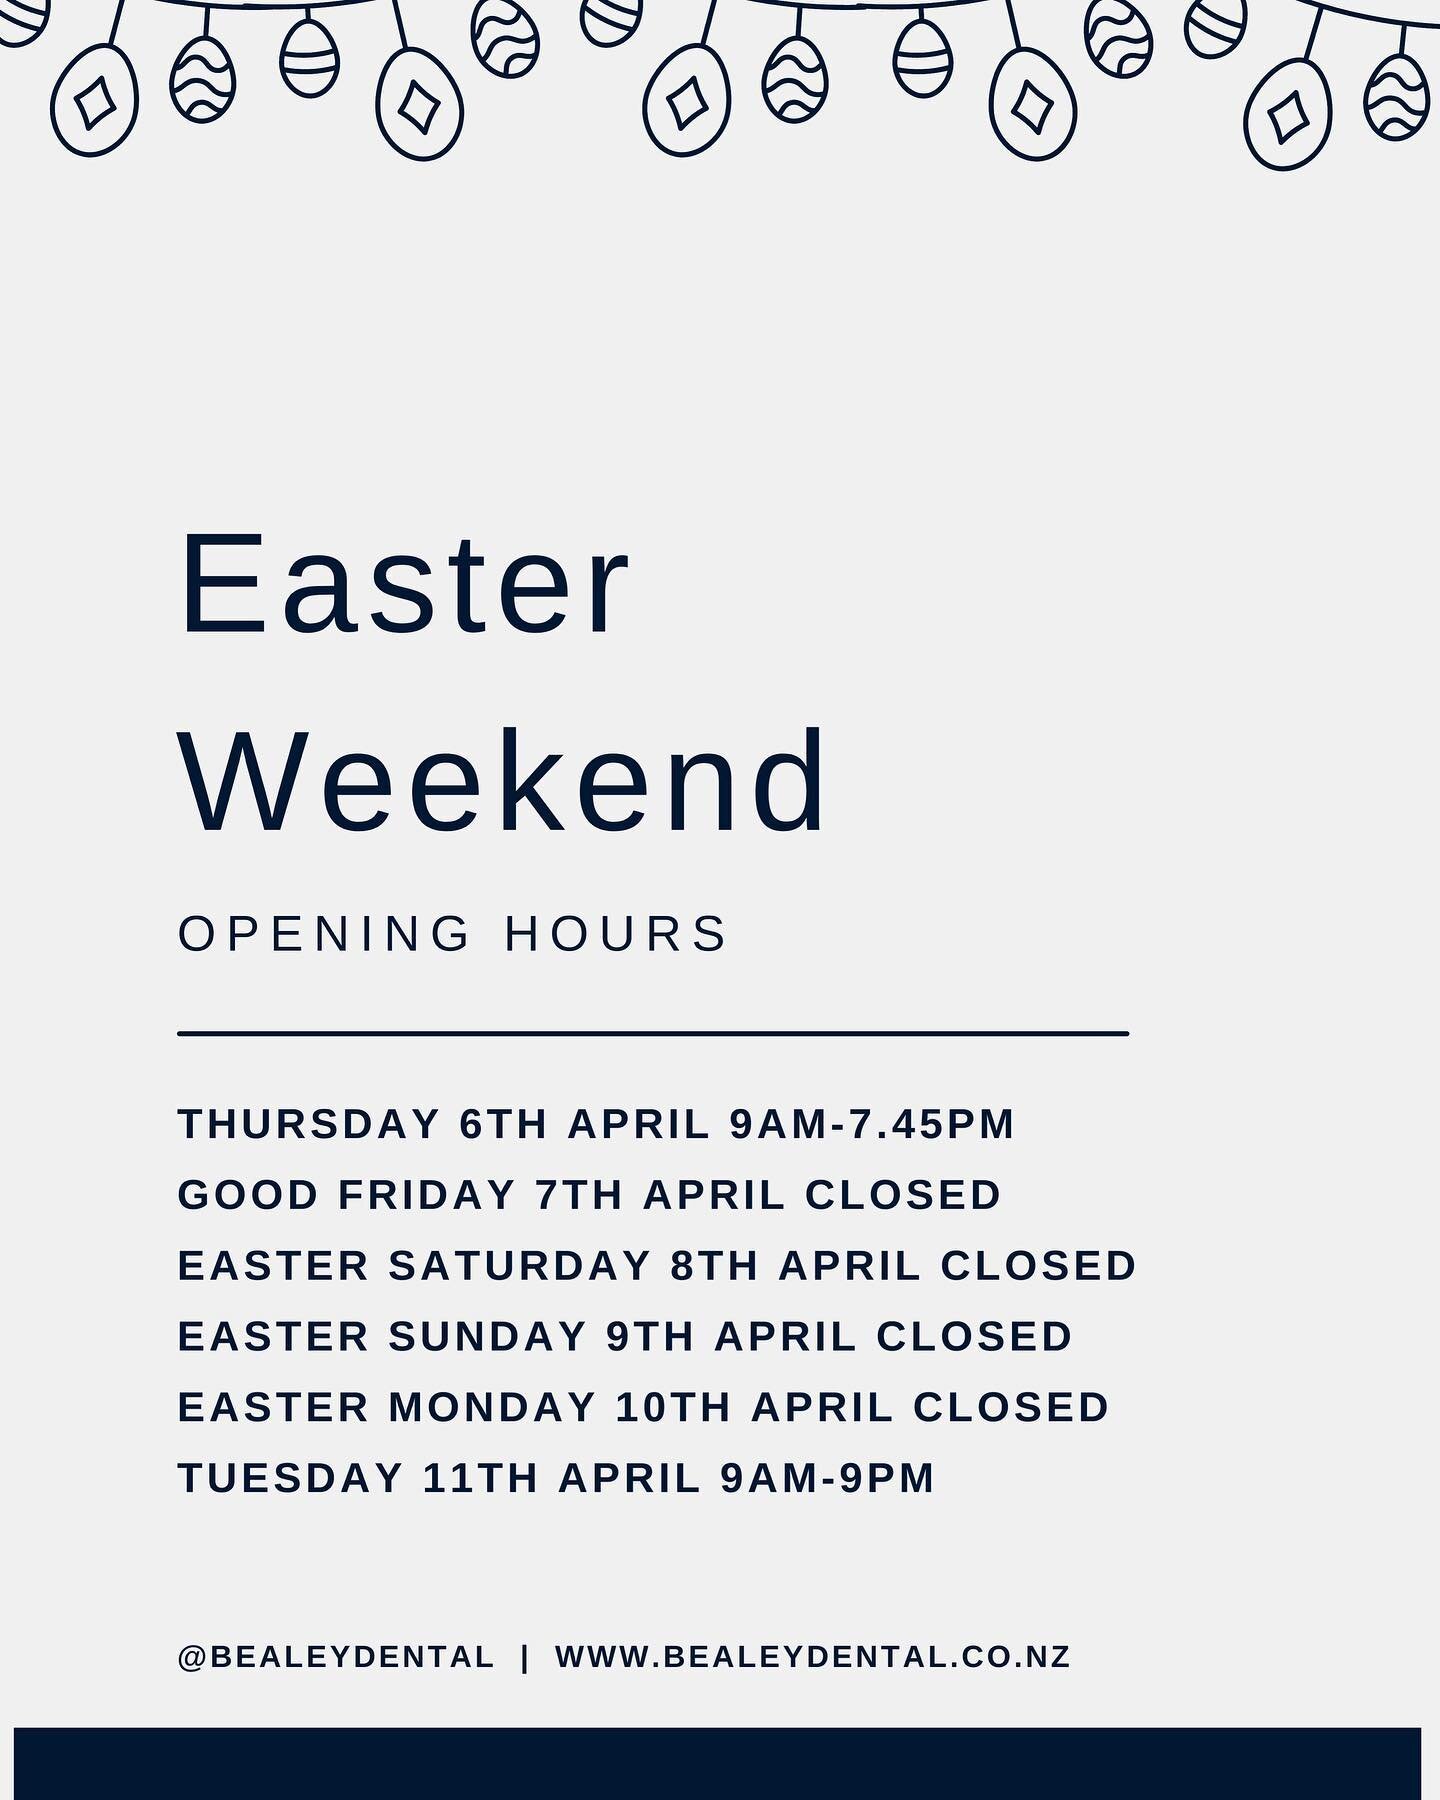 Kia ora whānau!

We will be closed over Easter to give our incredible staff a well deserved break! We will be back on Tuesday 11th April for all your dental needs.

If you have an emergency during this time, please call the hospital dental department